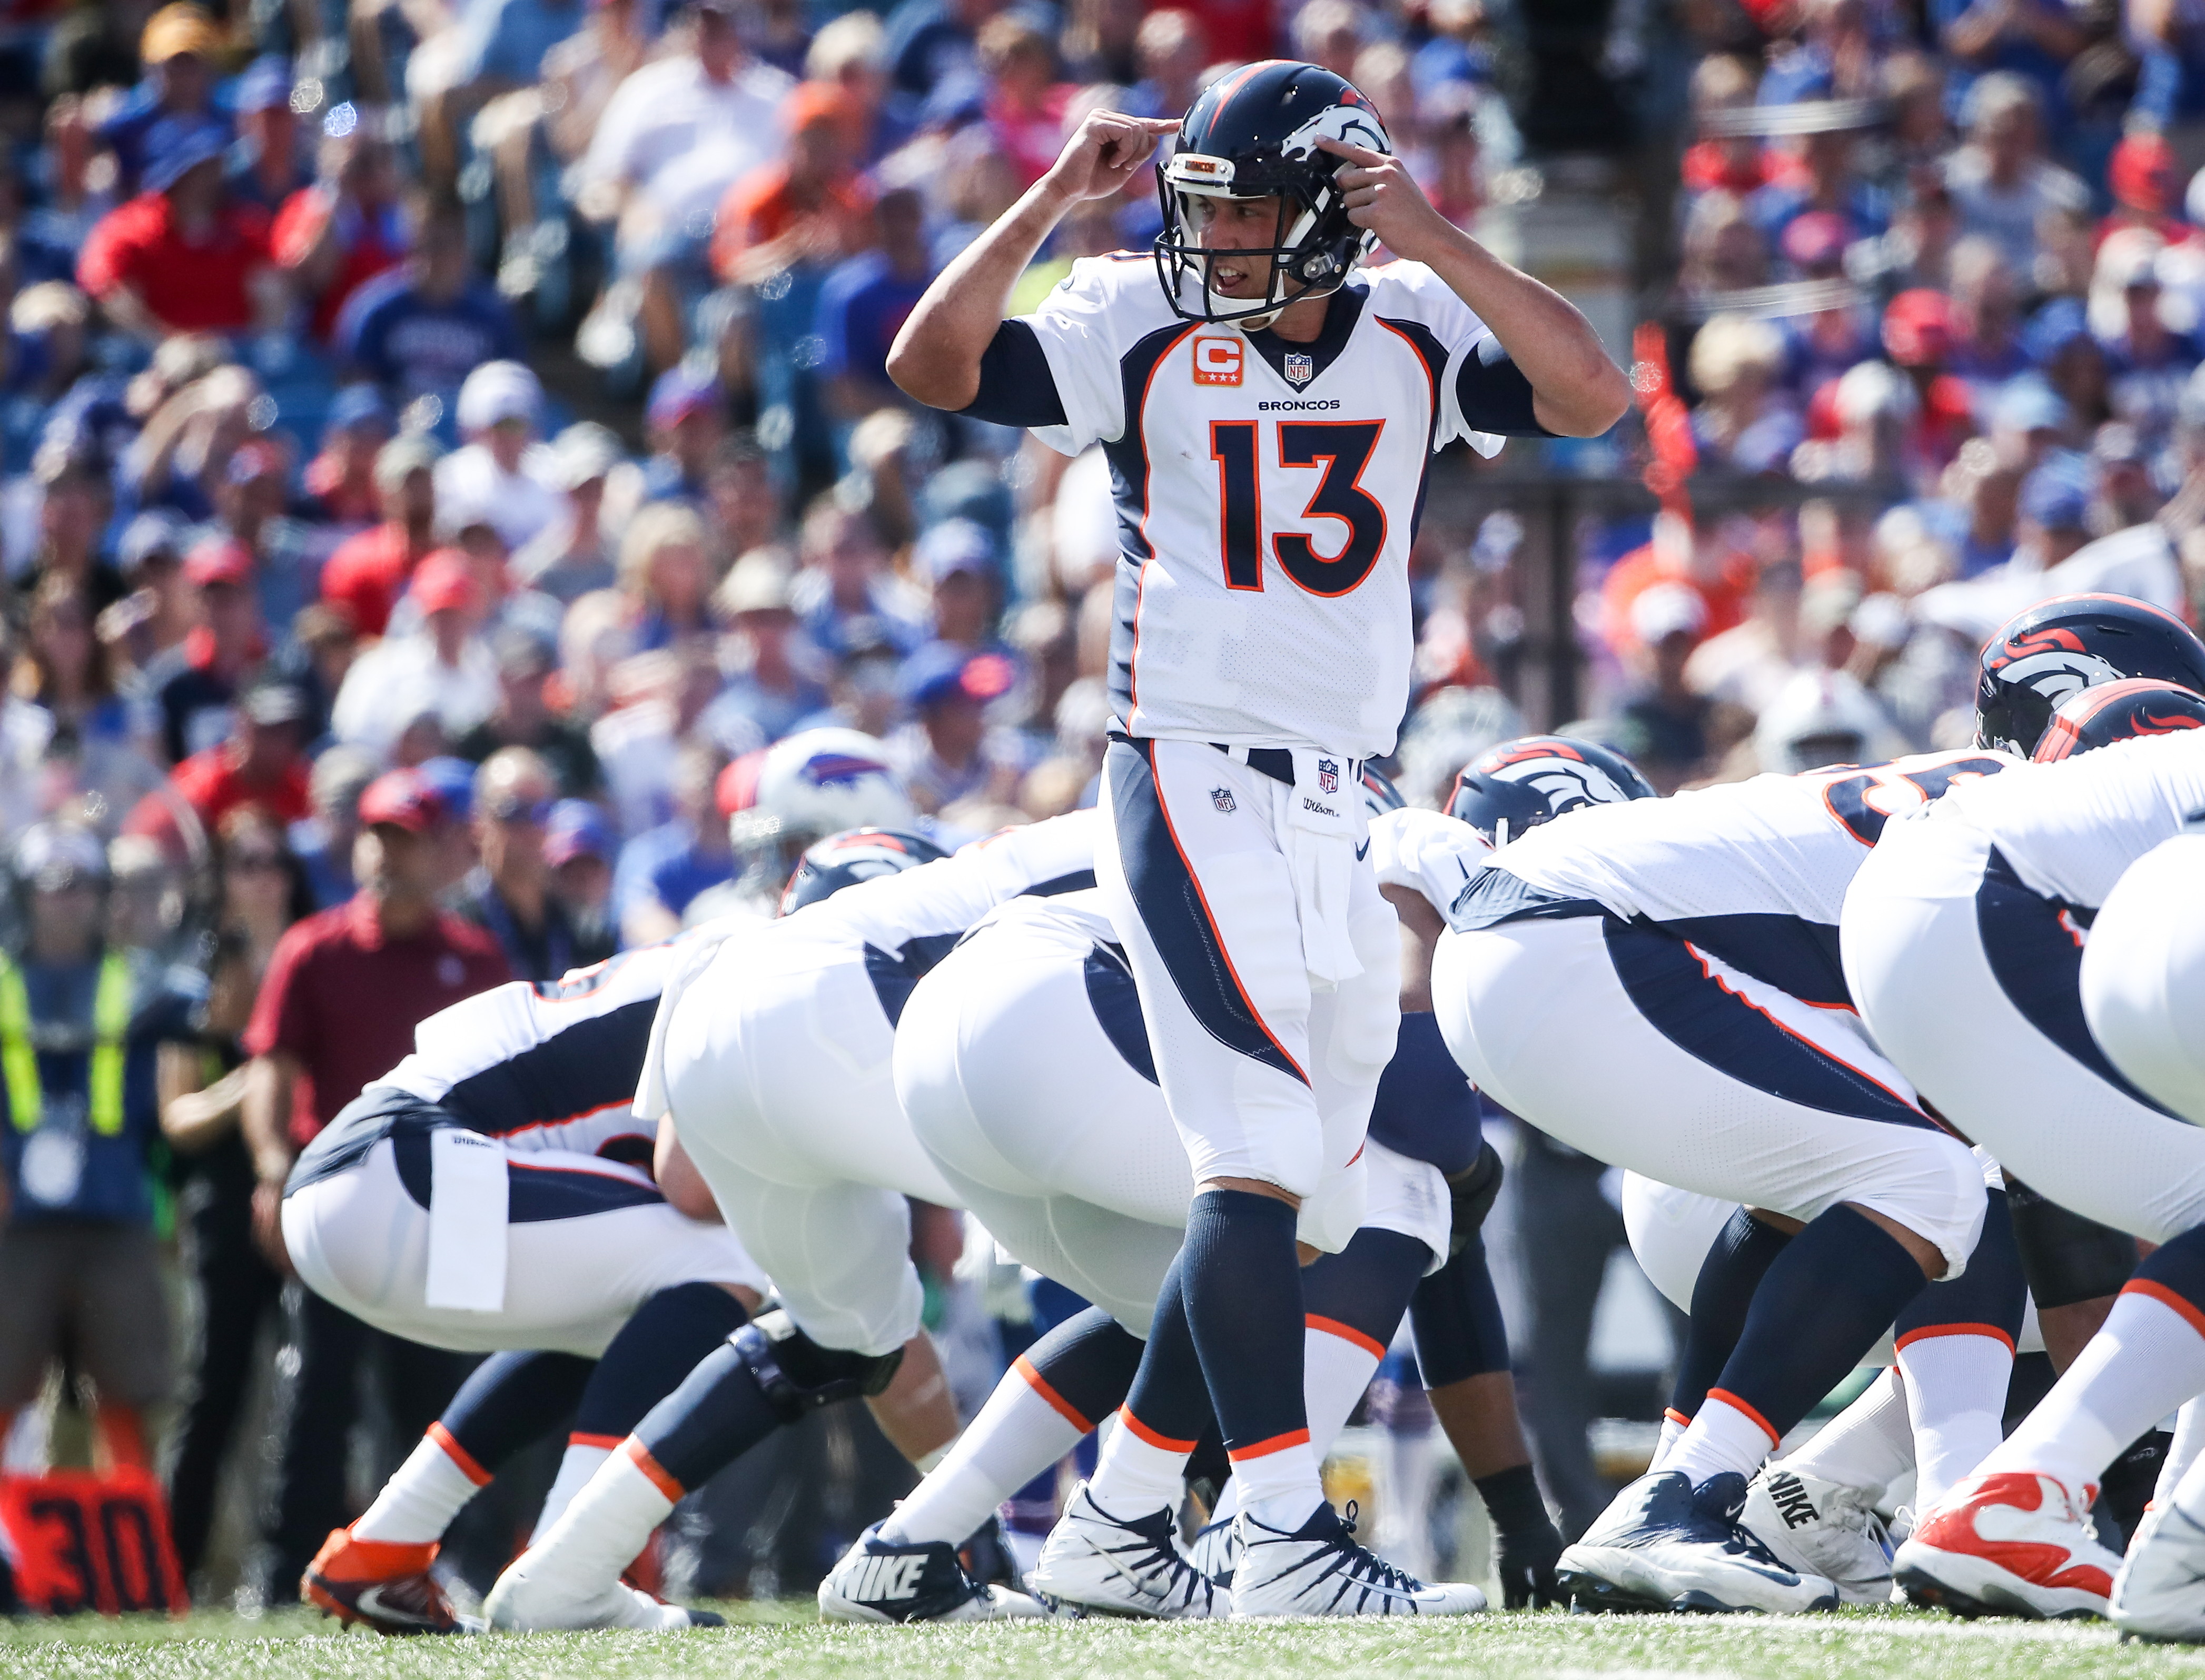 ORCHARD PARK, NY - SEPTEMBER 24: Trevor Siemian #13 of the Denver Broncos makes a signal during an NFL game against the Buffalo Bills on September 24, 2017 at New Era Field in Orchard Park, New York.  